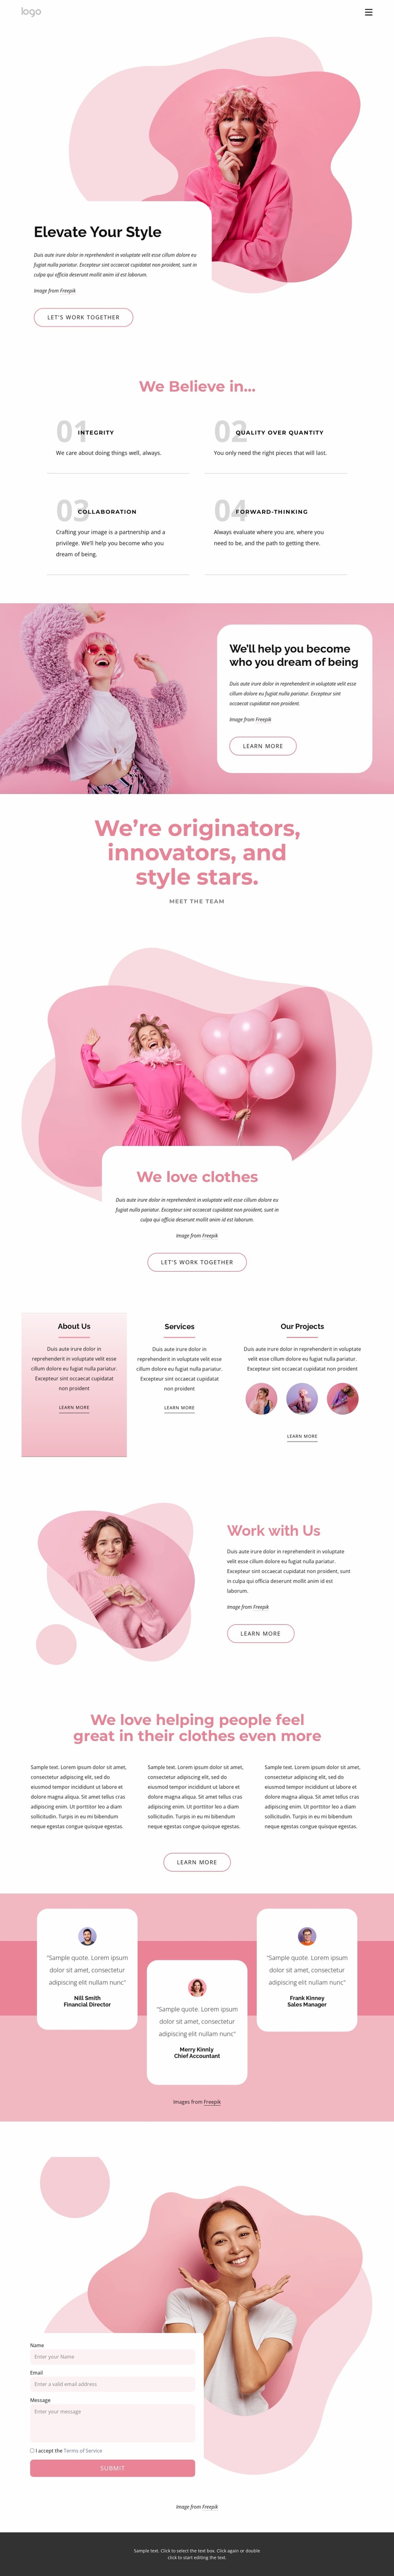 Elevate your style Landing Page